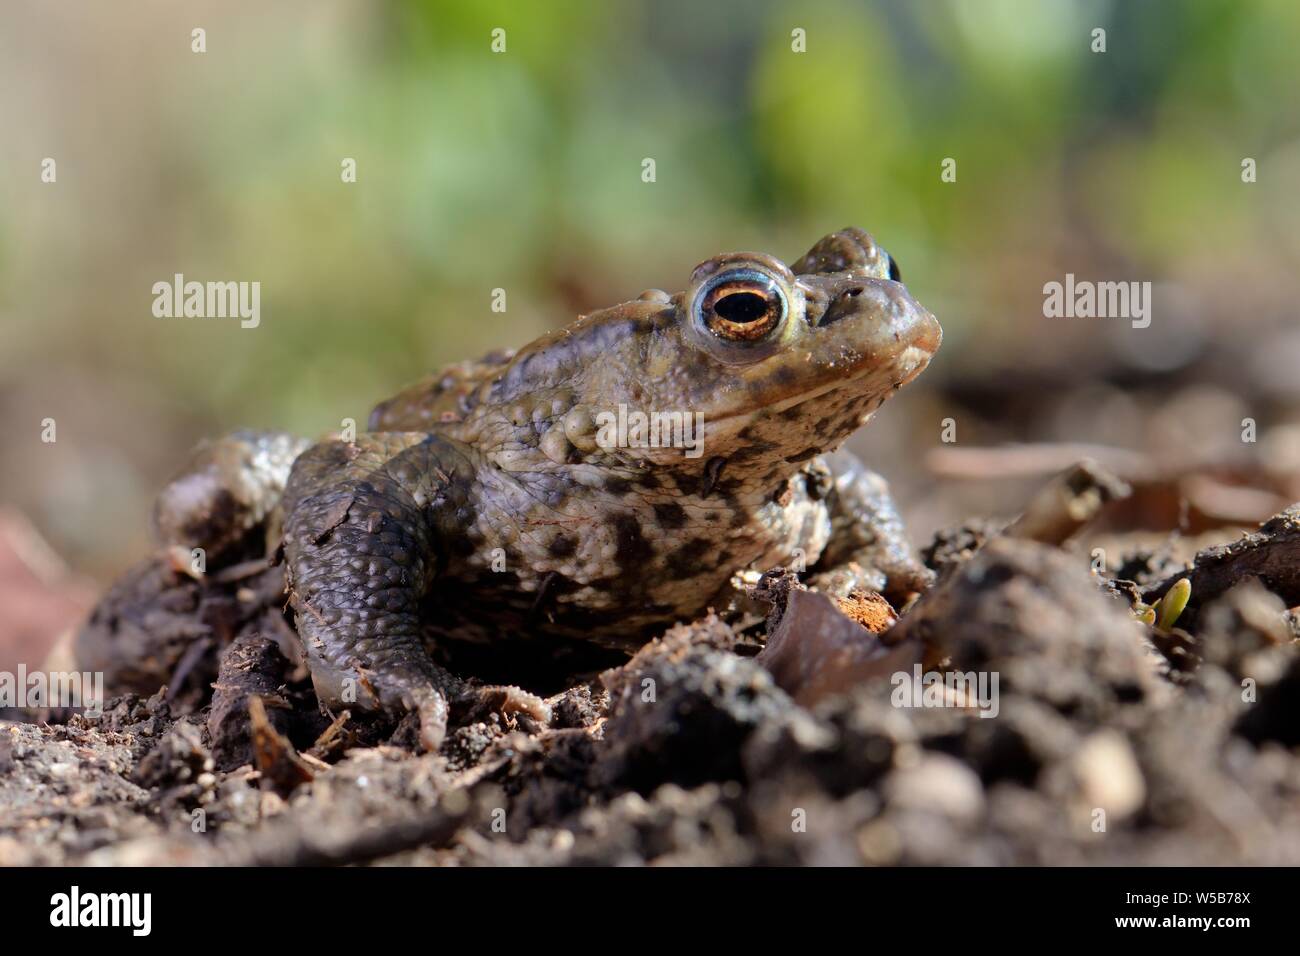 Common toad (Bufo bufo) in a garden flowerbed, Wiltshire, UK, March. Stock Photo